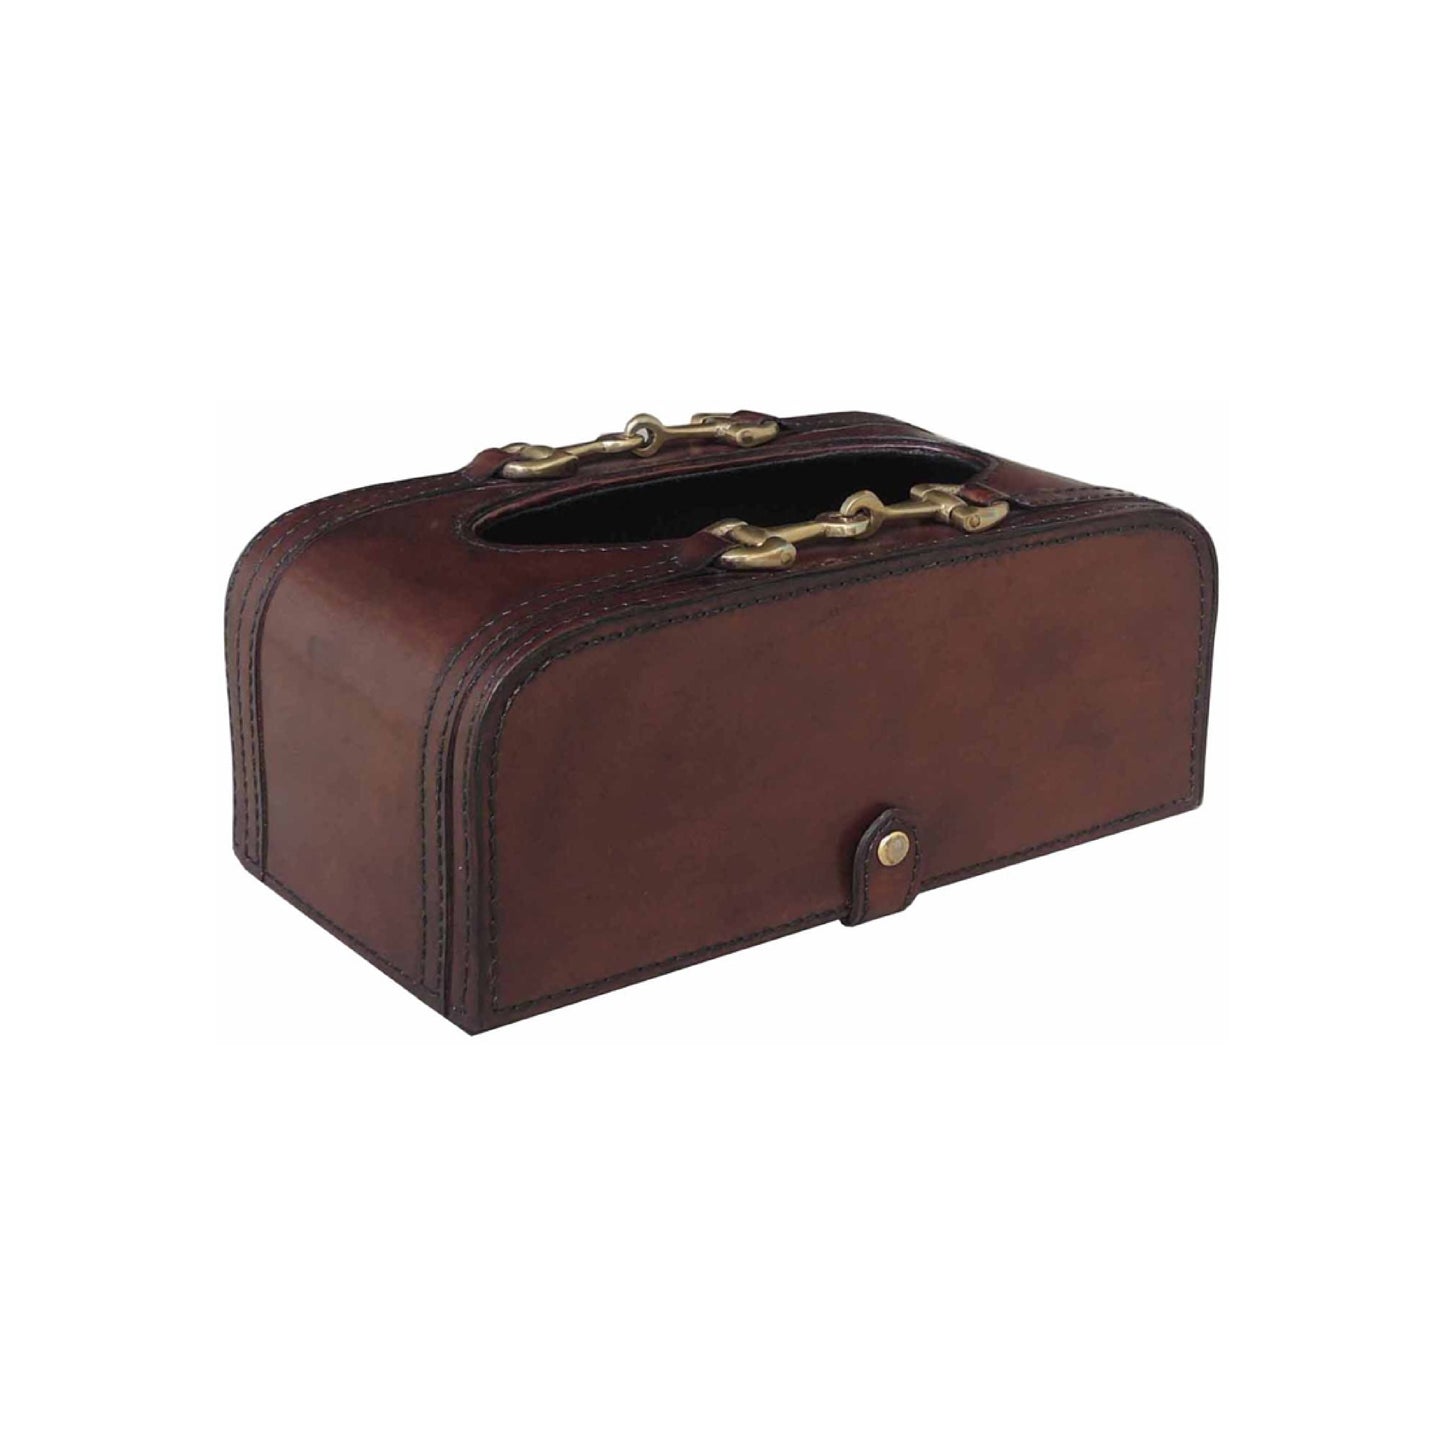 Leather Tissue Box with Buckle